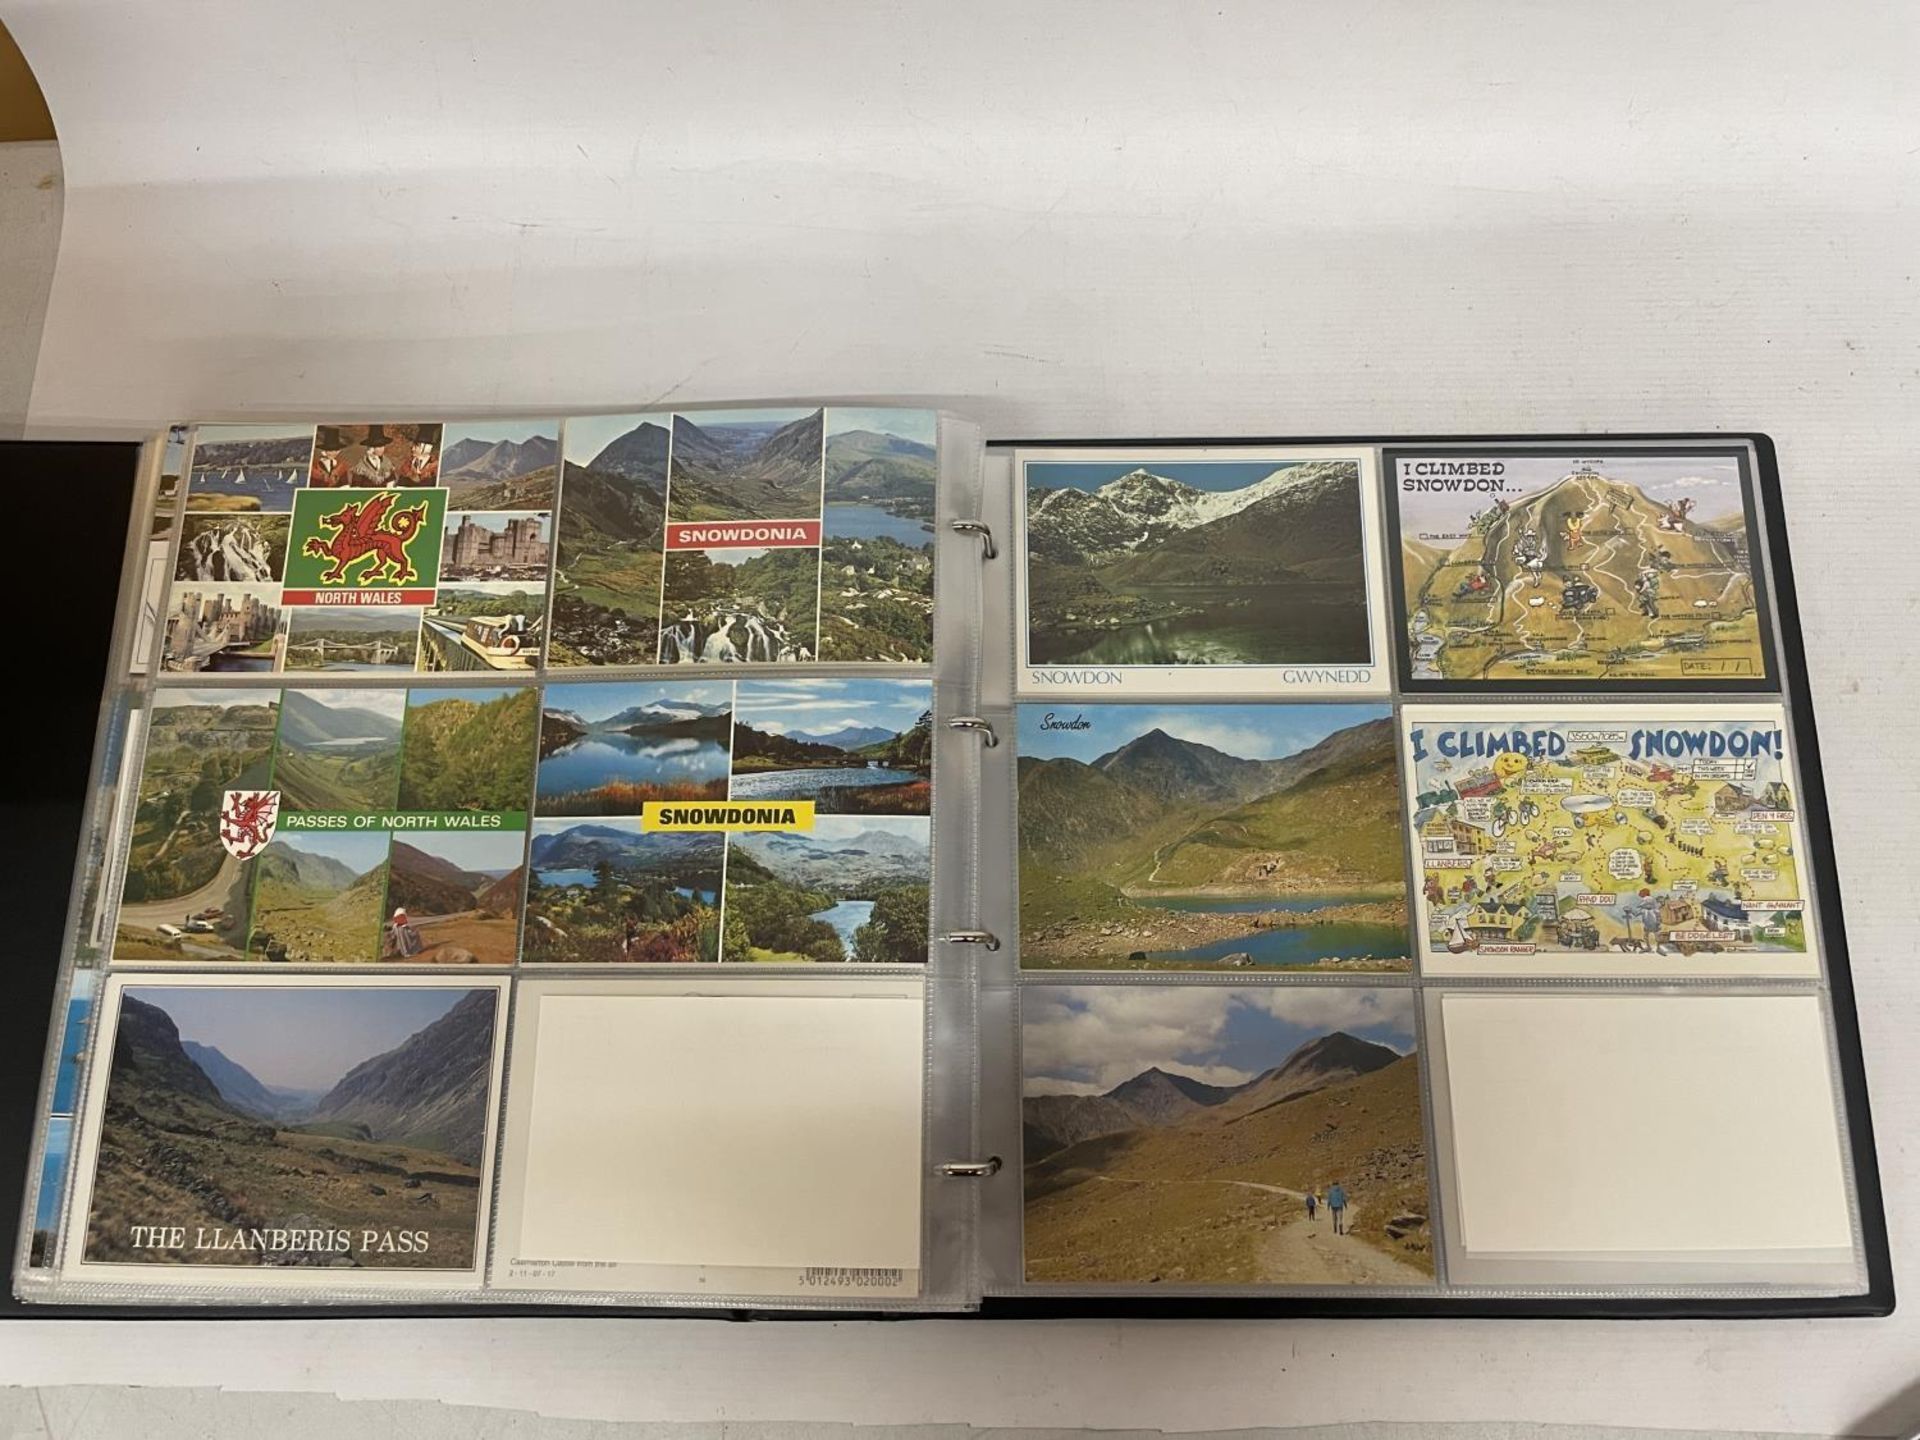 APPROXIMATELY 435 POSTCARDS RELATING TO THE ISLE OF MAN, WALES AND IRELAND IN A FOLDER - Image 9 of 15